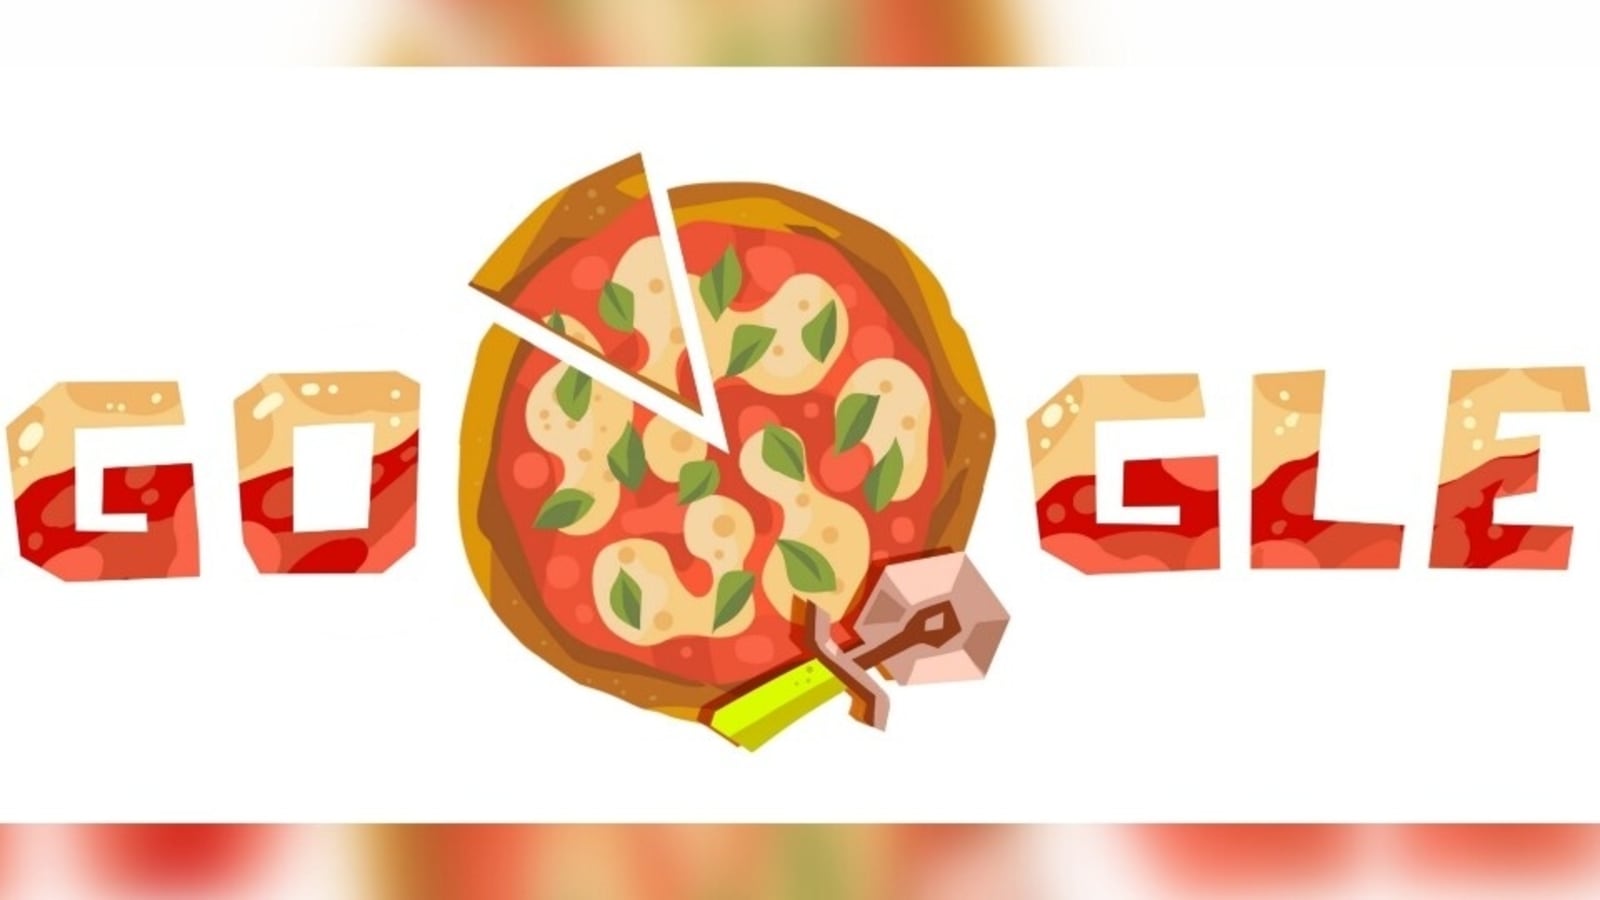 Pizza Celebrated With a Google Doodle Mini-Game: Here's How to Play